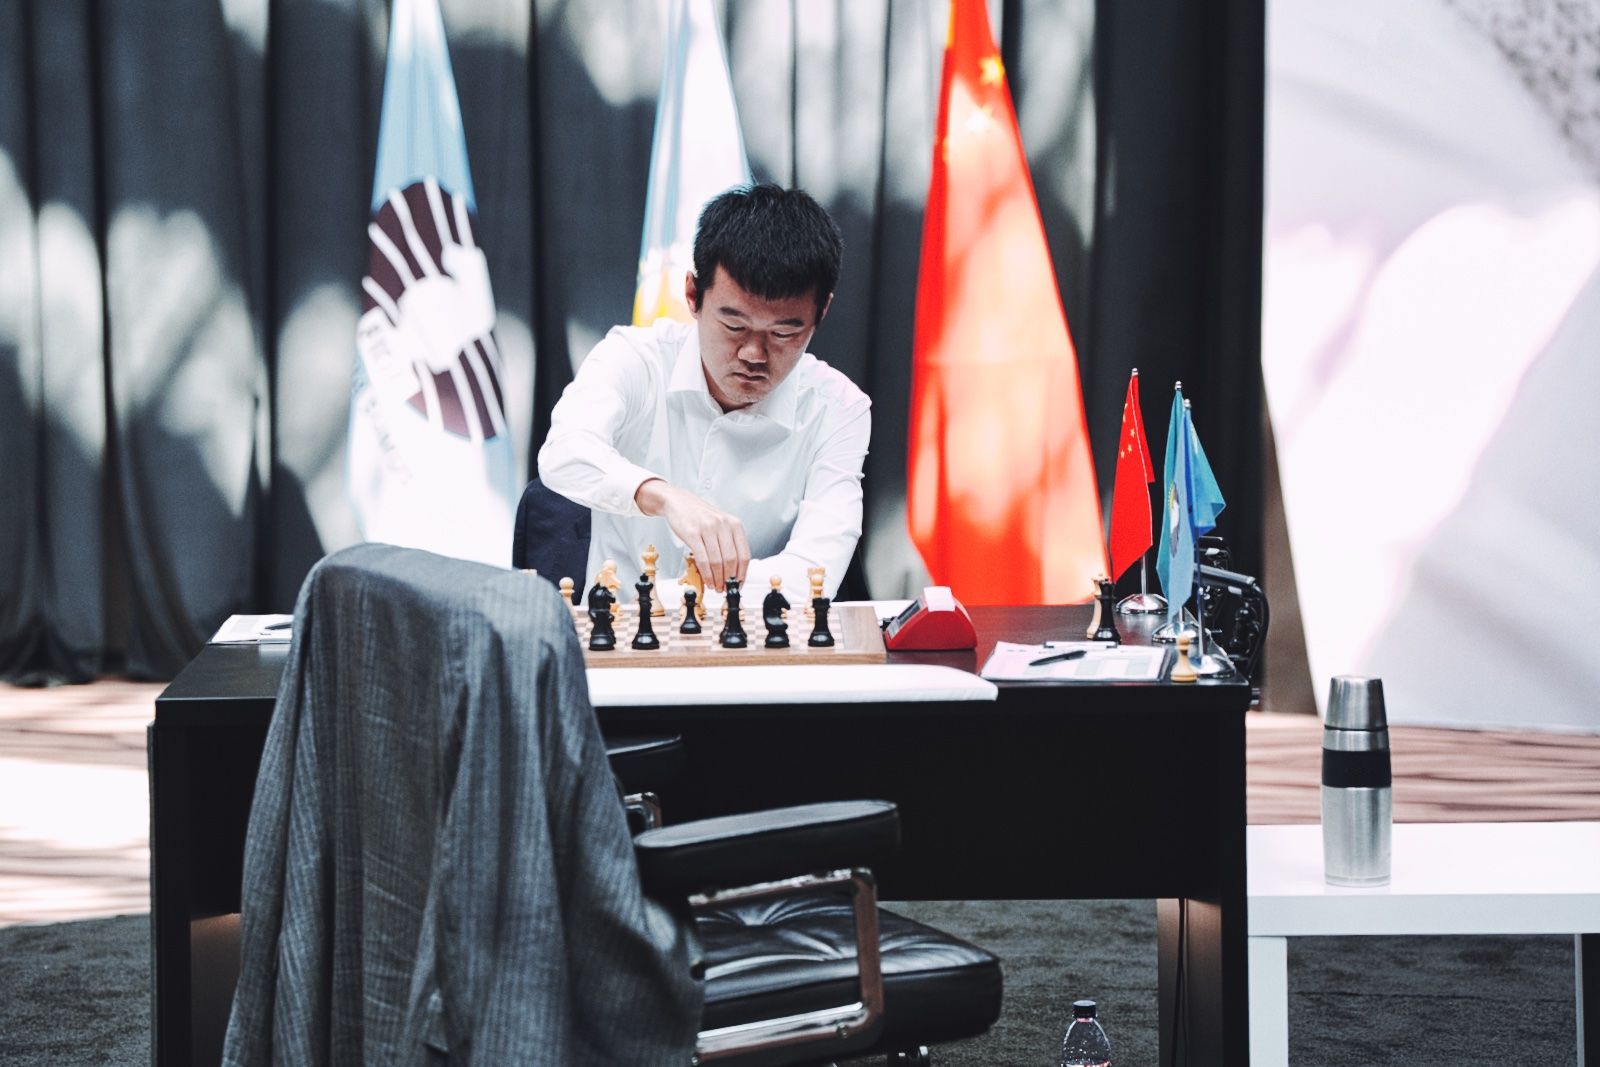 Ding Liren wins wild Game 12 to level the scores again